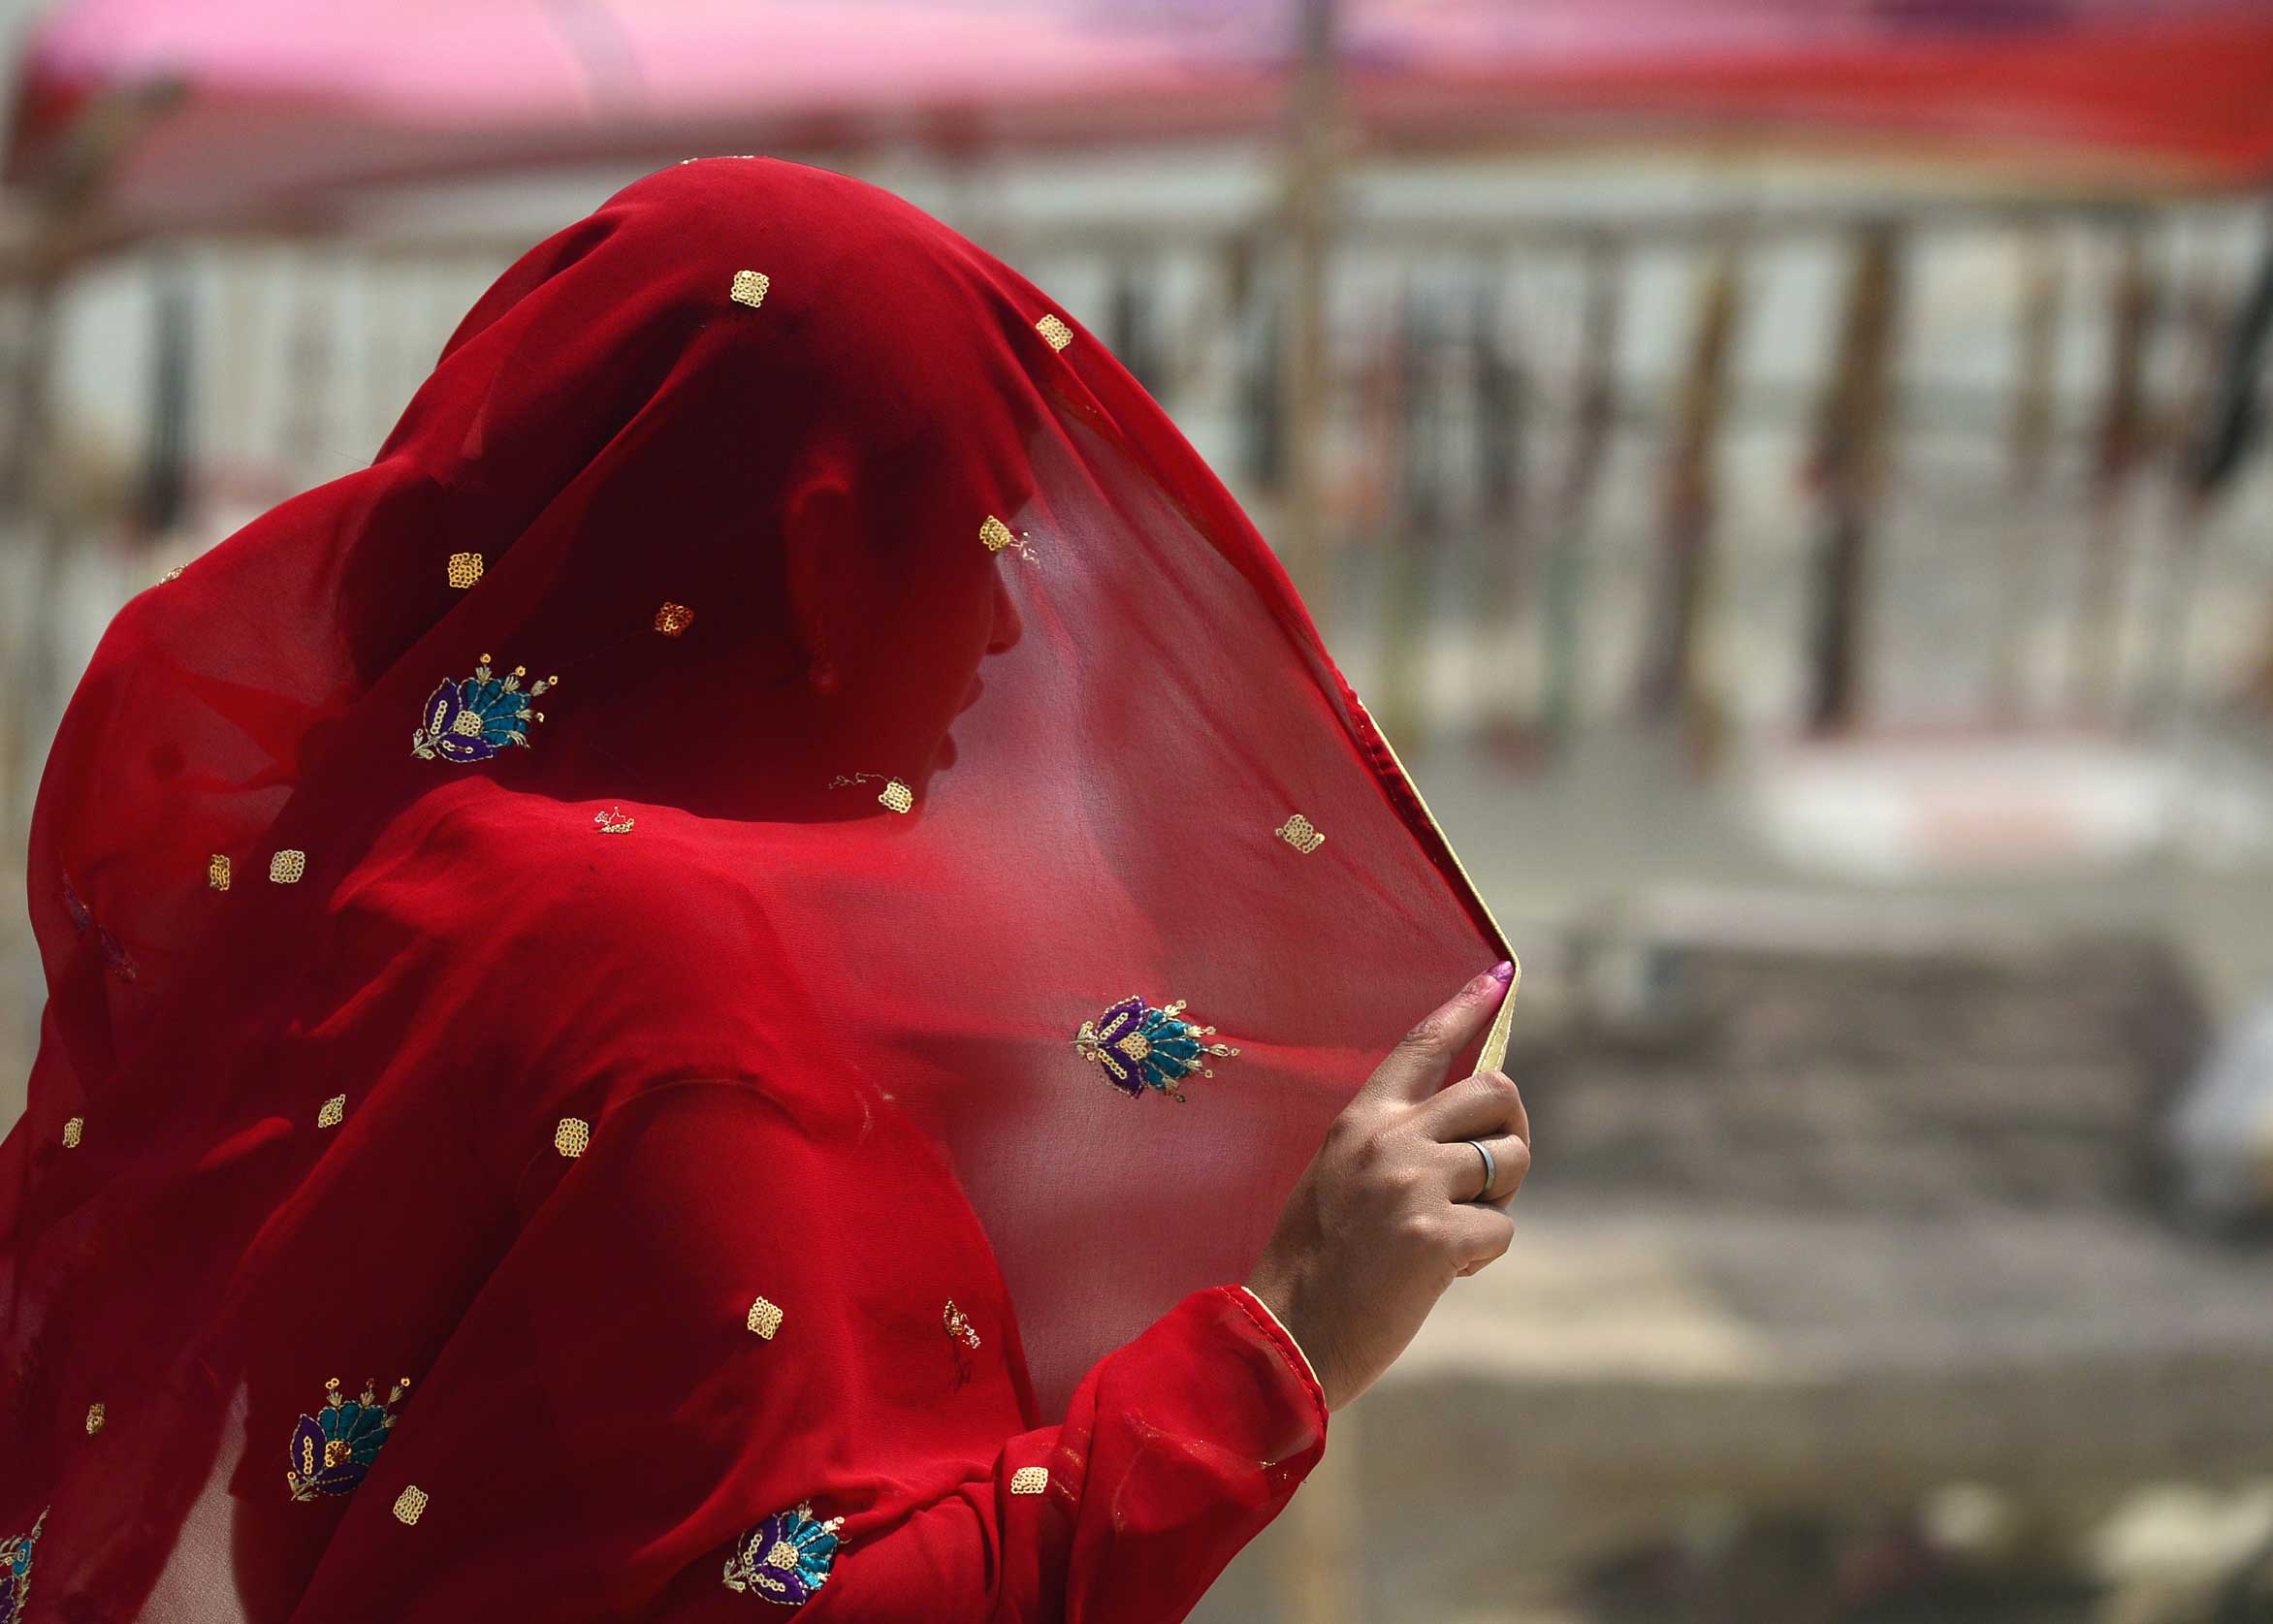 An Indian woman covers her face as she heads into a dust storm